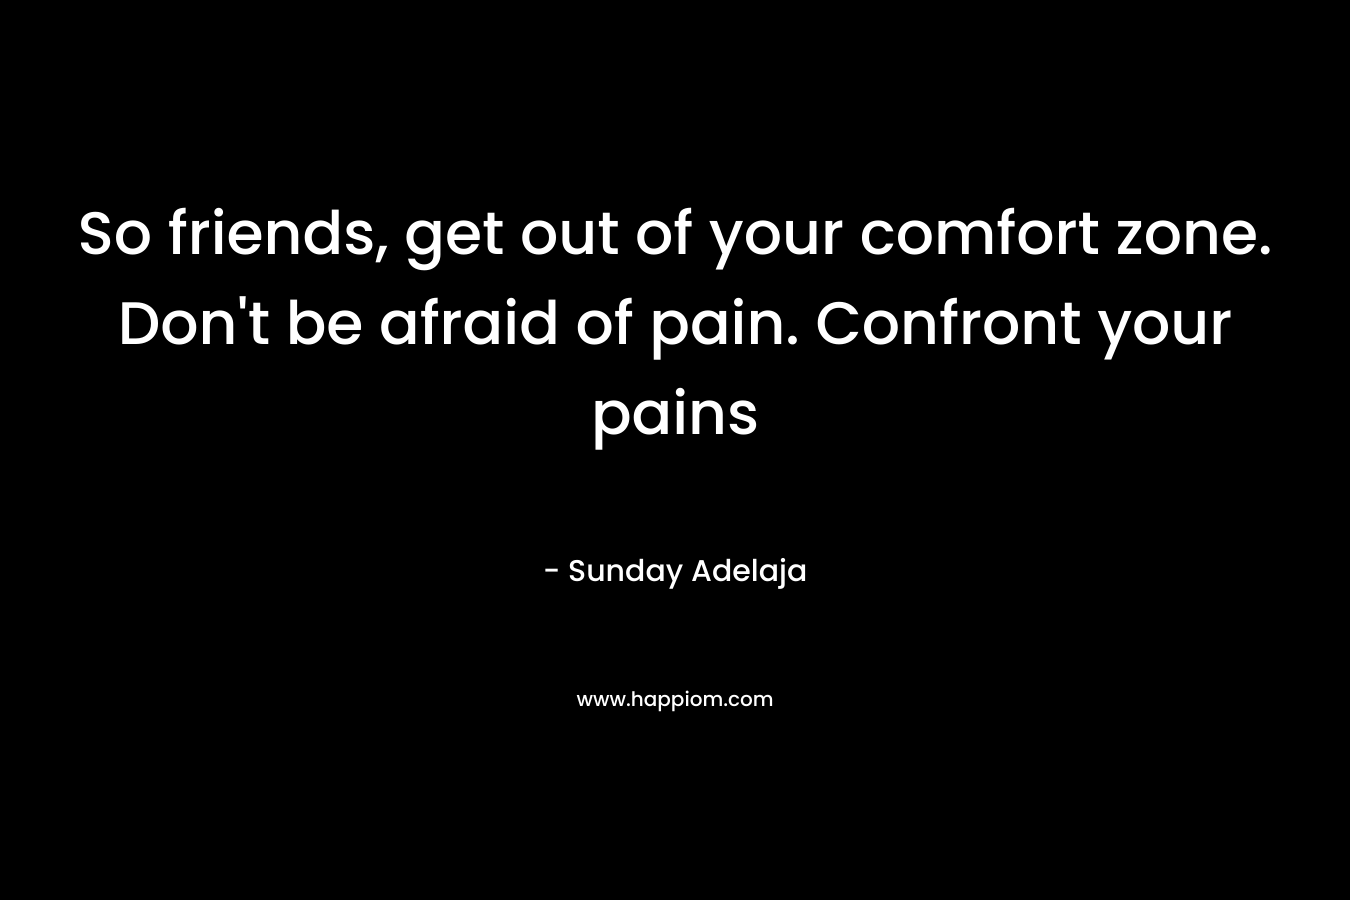 So friends, get out of your comfort zone. Don't be afraid of pain. Confront your pains